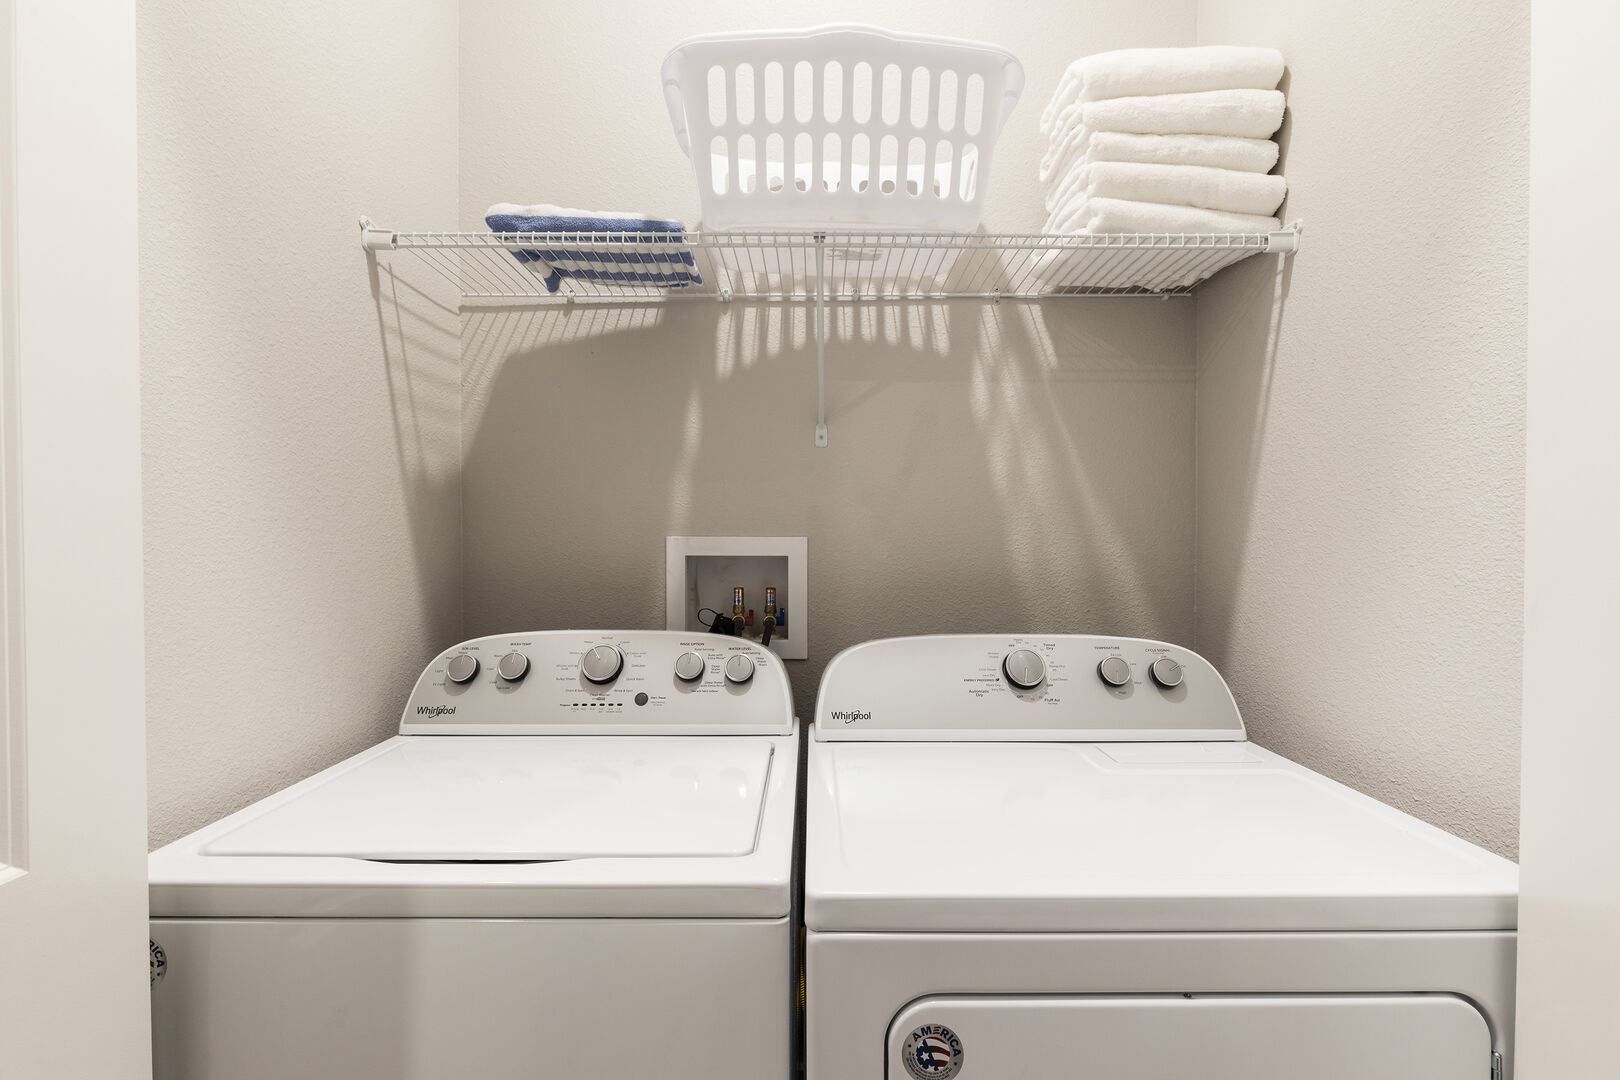 Need to wash? You have it all inside the home!